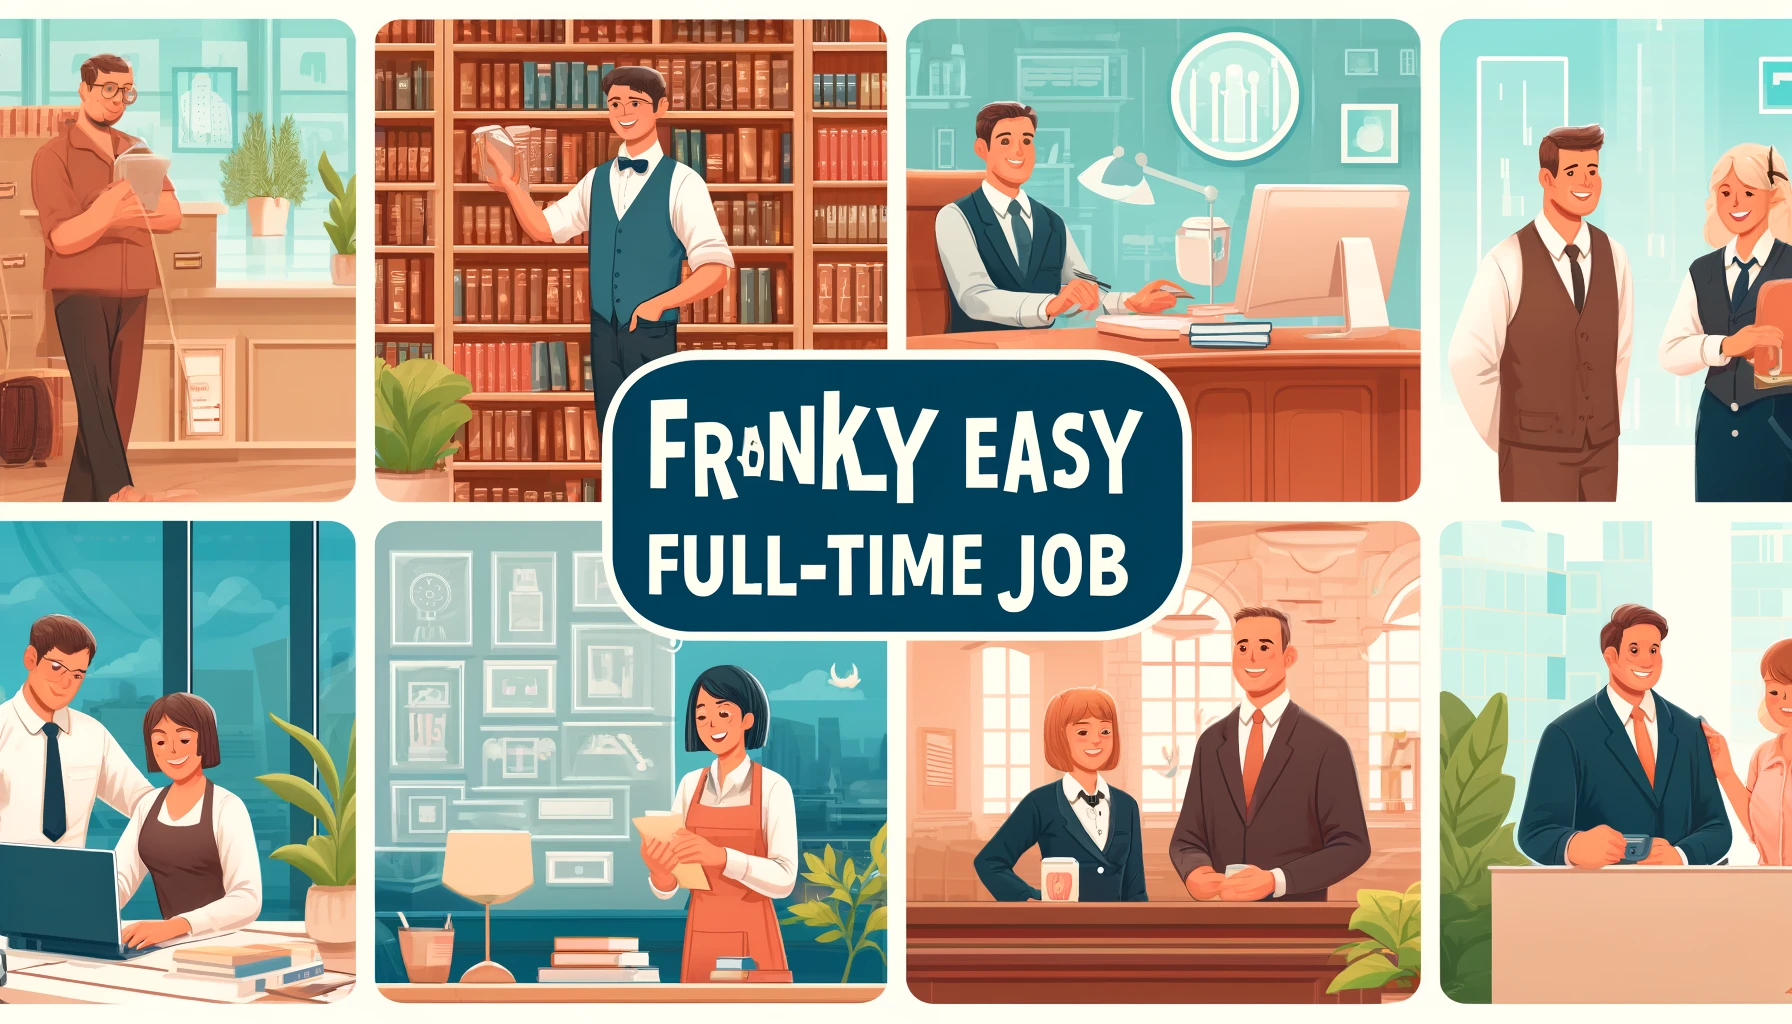 Frankly easy job full-time employee